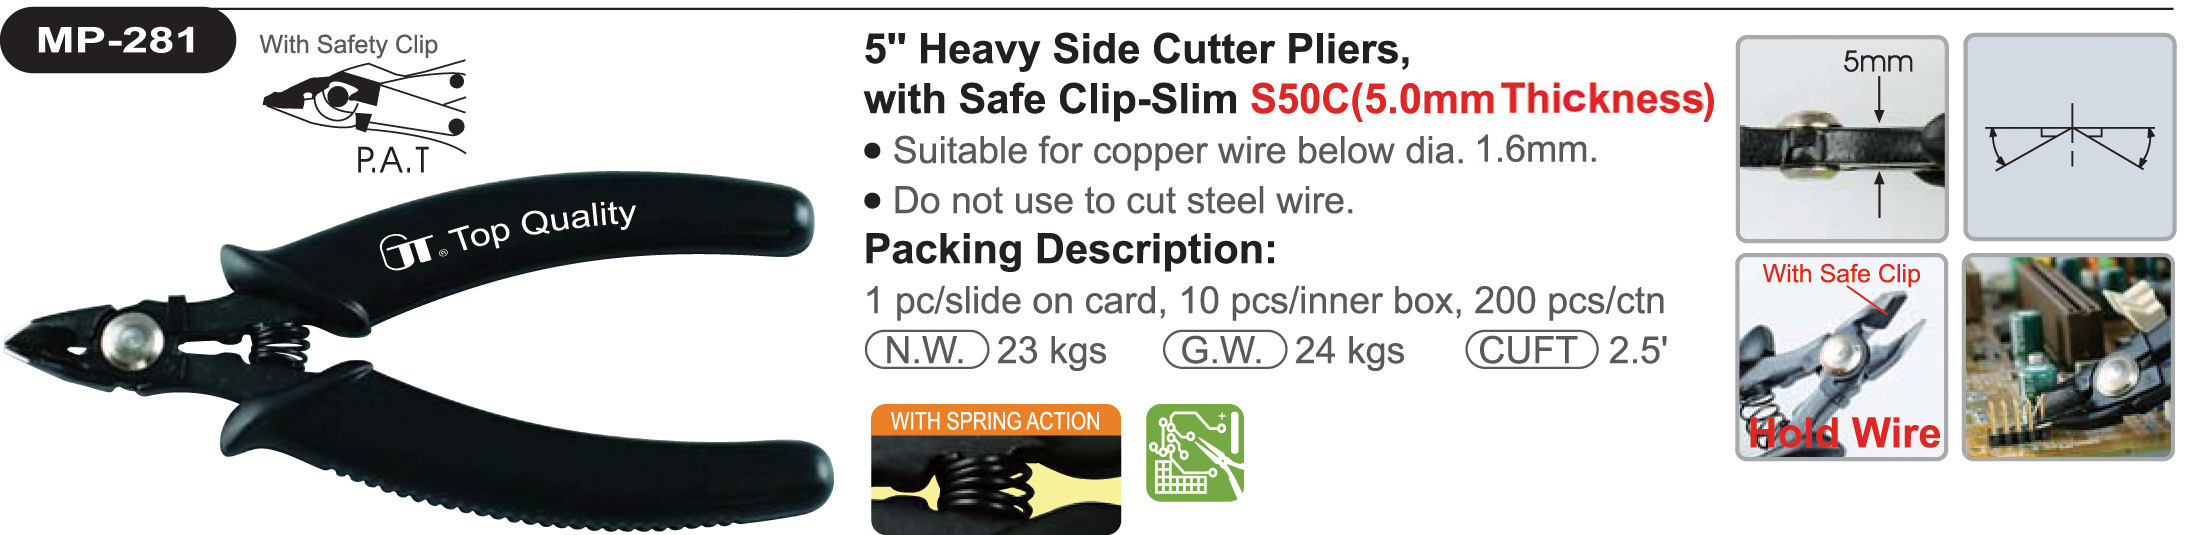 proimages/product/pliers/cutting_pliers/Diagonal_Cutters/MP-281/MP-281.jpg